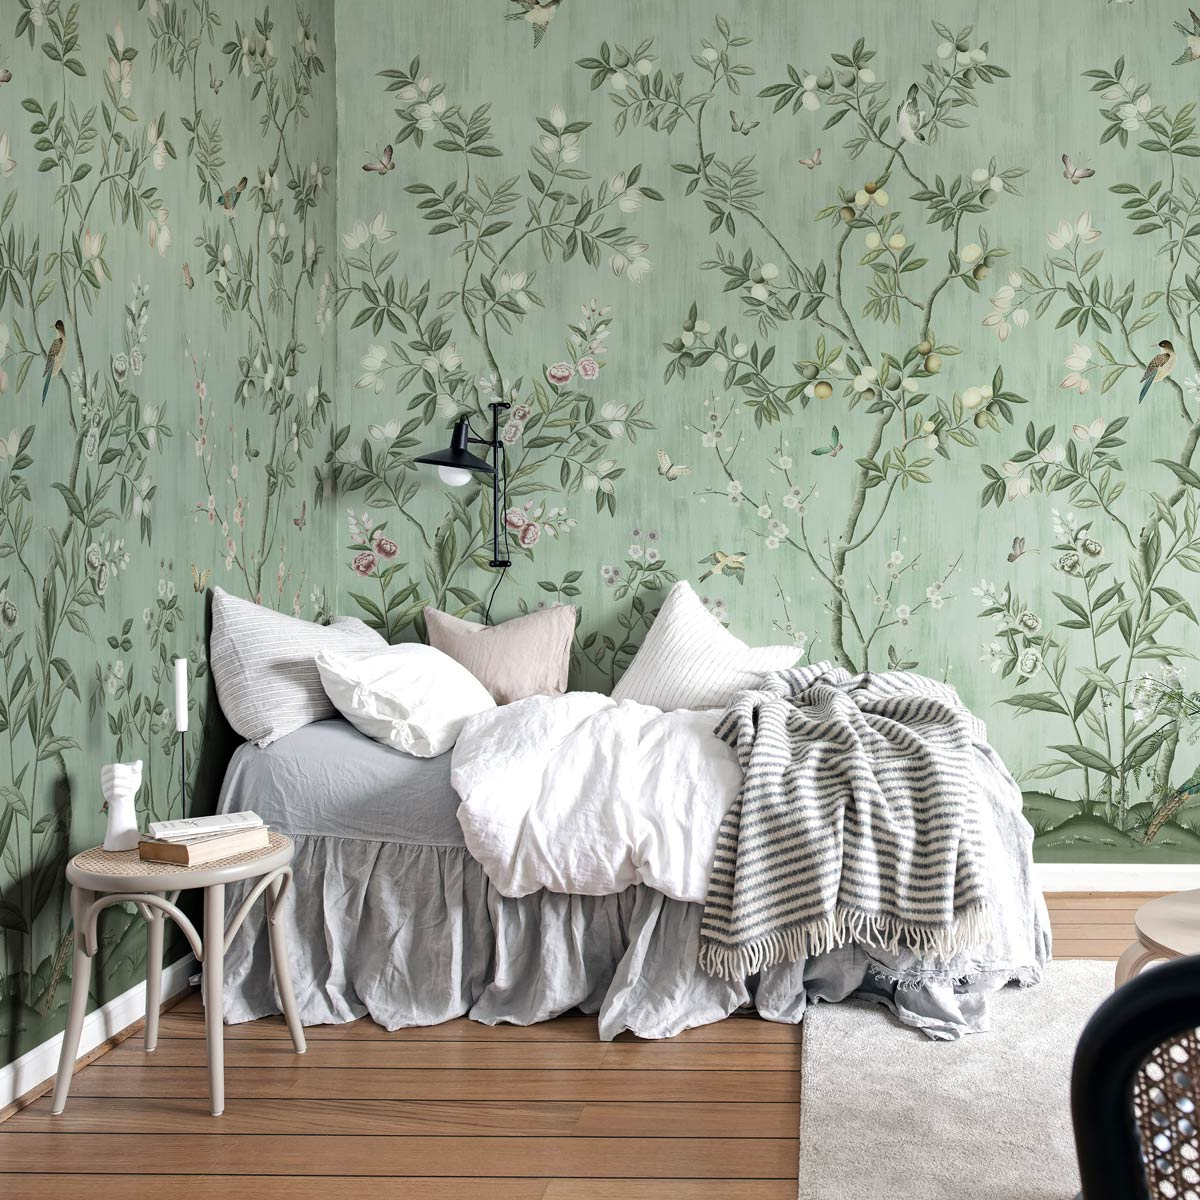 Floral Brick Wallpaper - Arthouse Shabby Chic Floral Brick Wallpaper